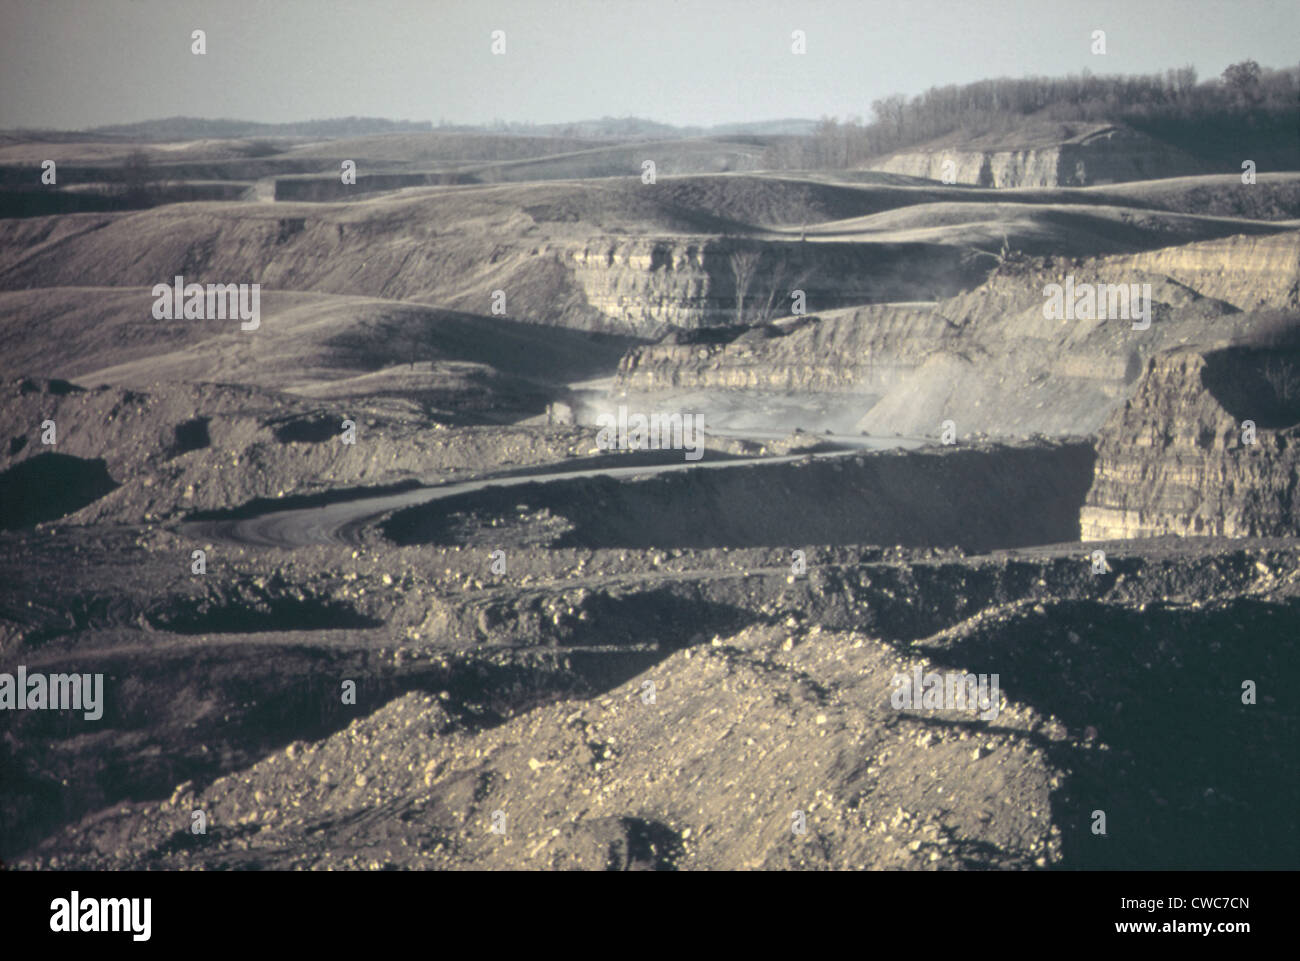 An artificial Badlands describes the scarred landscape after coal strip mining by the Hanna Coal Company in southeastern Ohio. Stock Photo